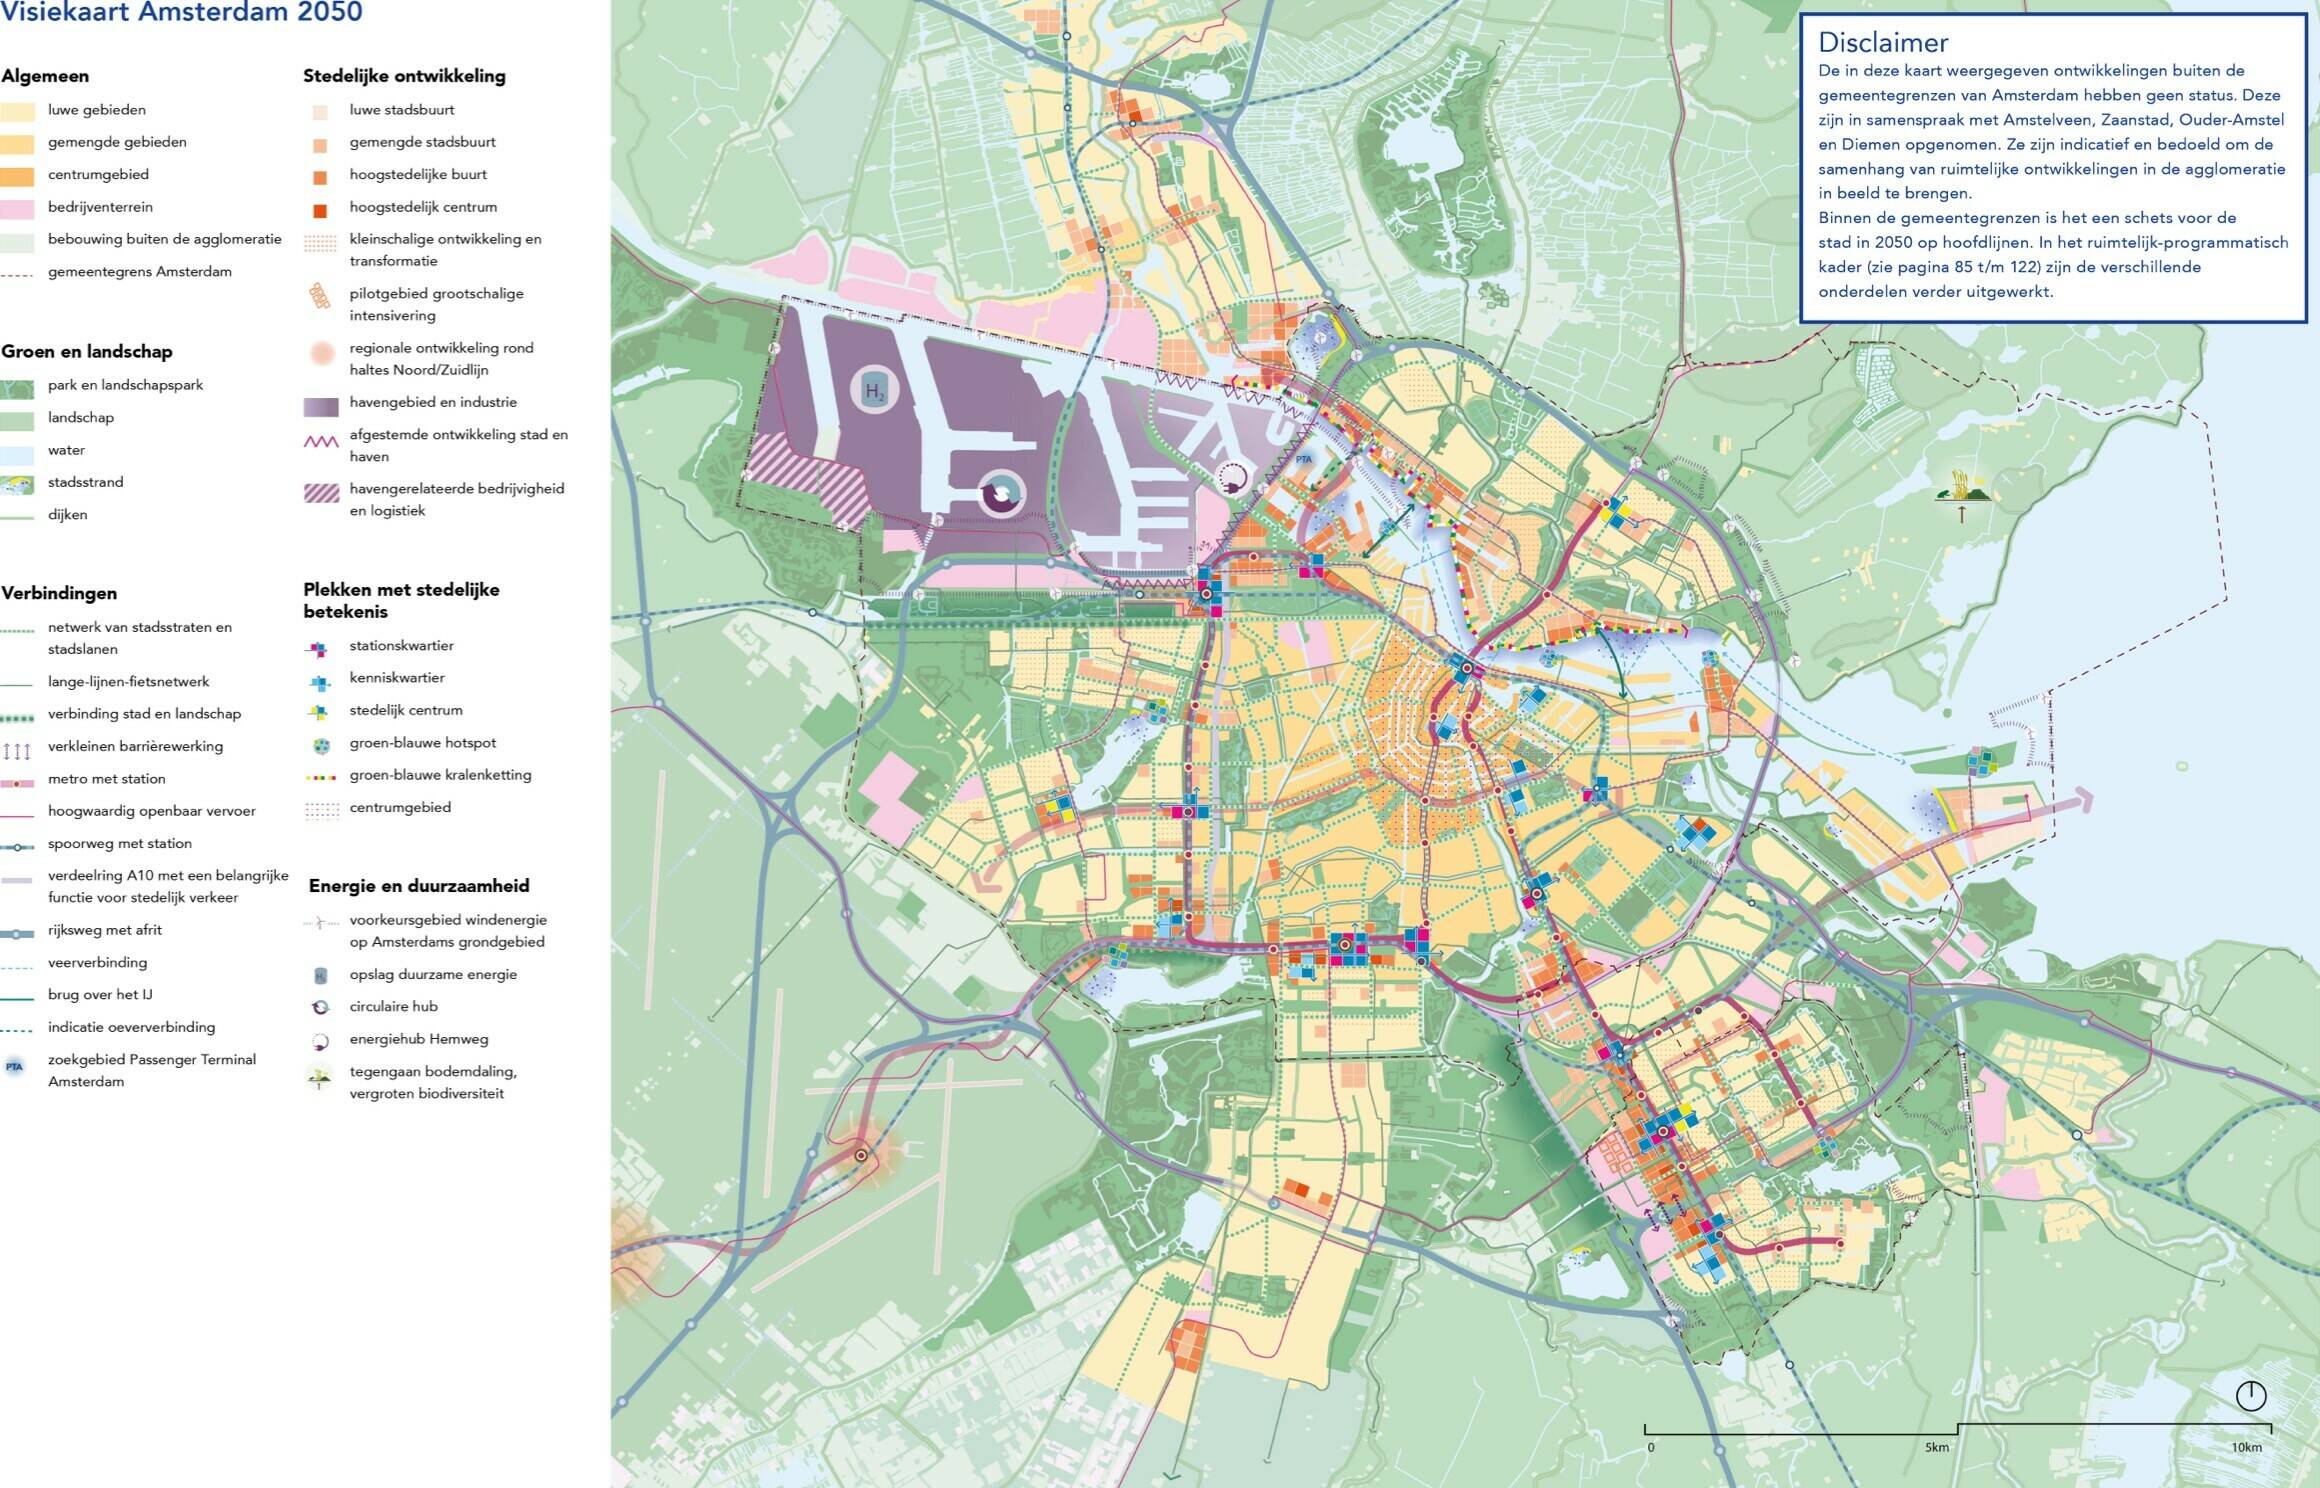 vision map of Amsterdam with agenda